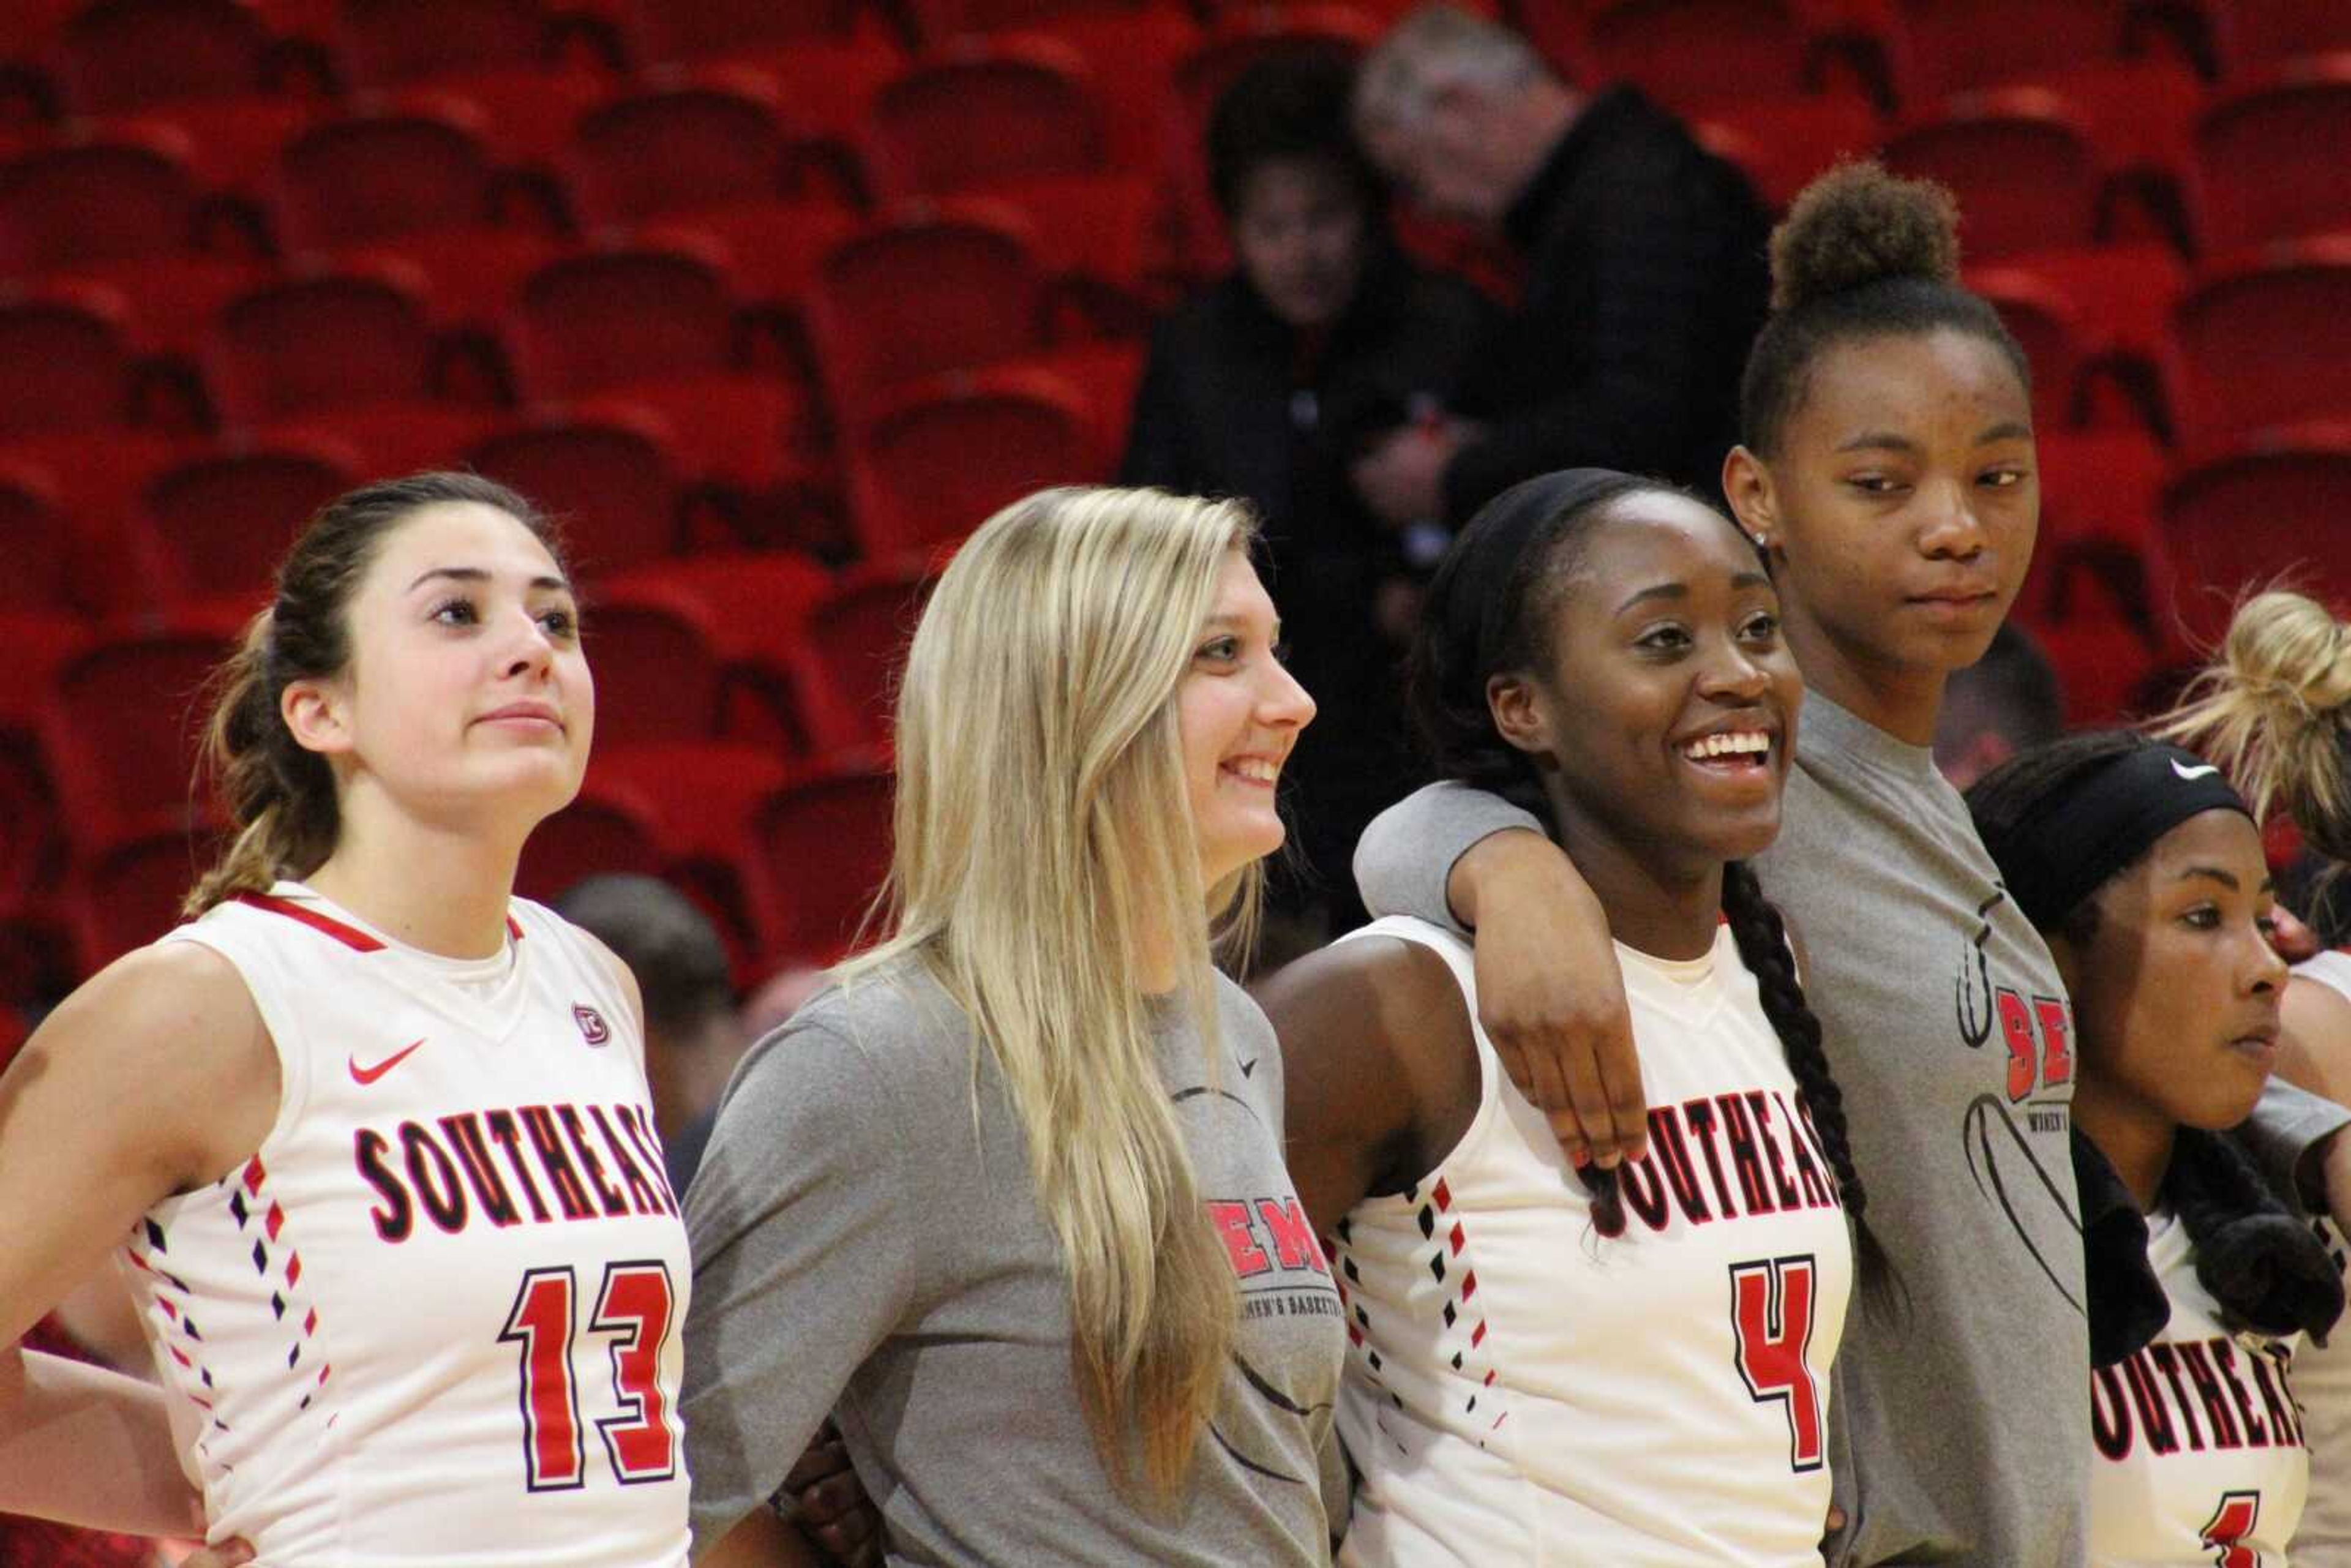 Sophomore guard Jessie Harshberger, No. 13, senior guard Kaley Leyhue and junior forward Dolapo Balogun, No. 4, stand on the court after the game on Nov. 14 against Missouri Valley to sing the Southeast Alma mater.